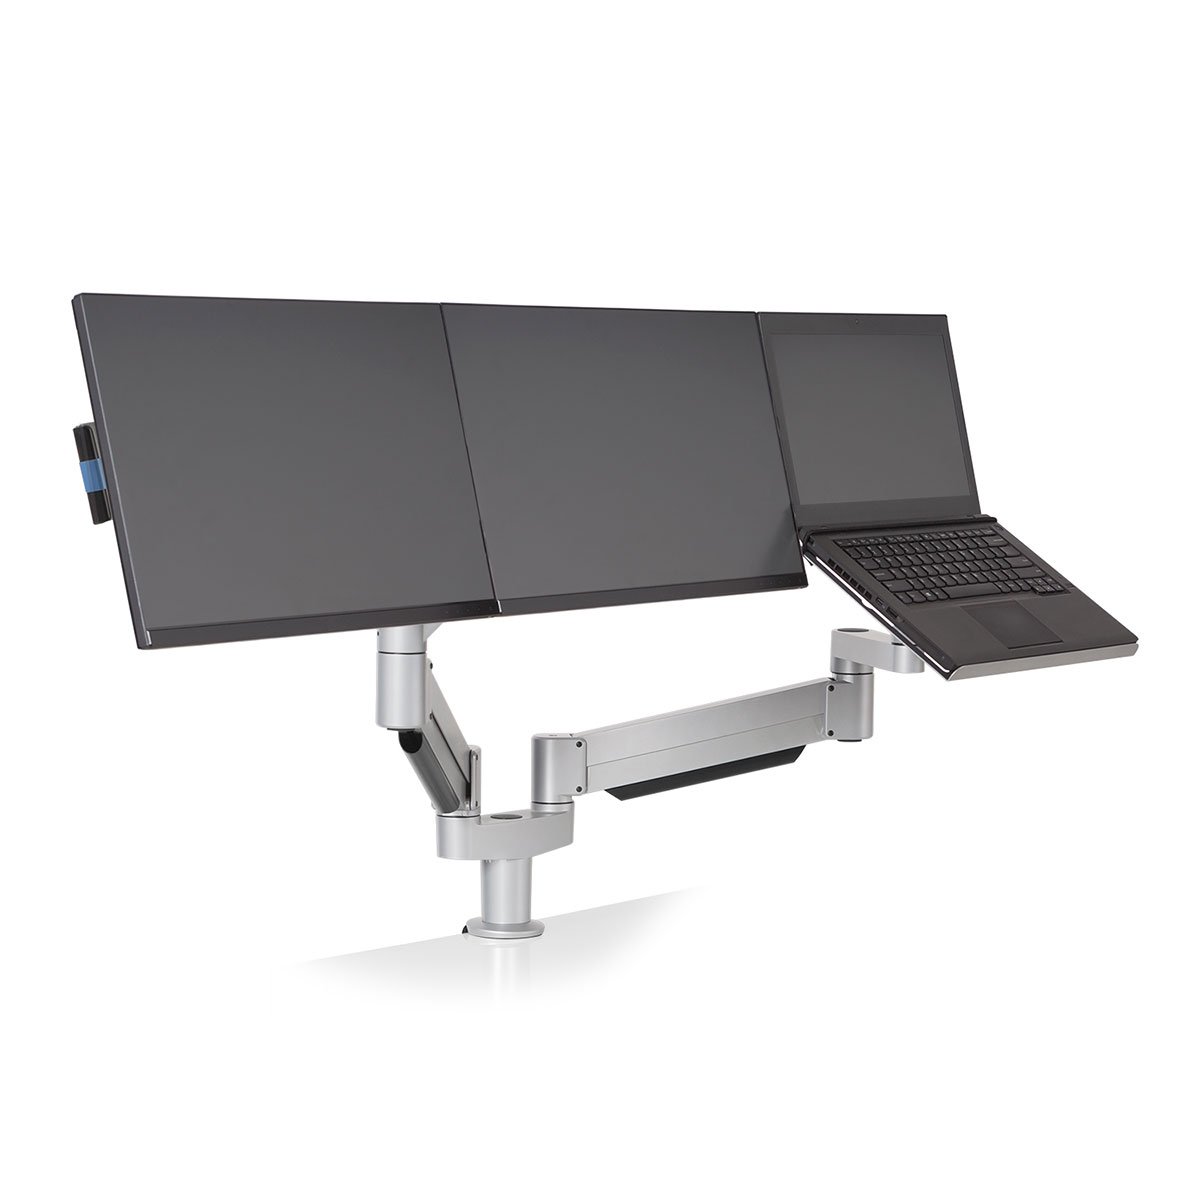 Innovative 7050-Switch Laptop and Dual Monitor Arm Mount